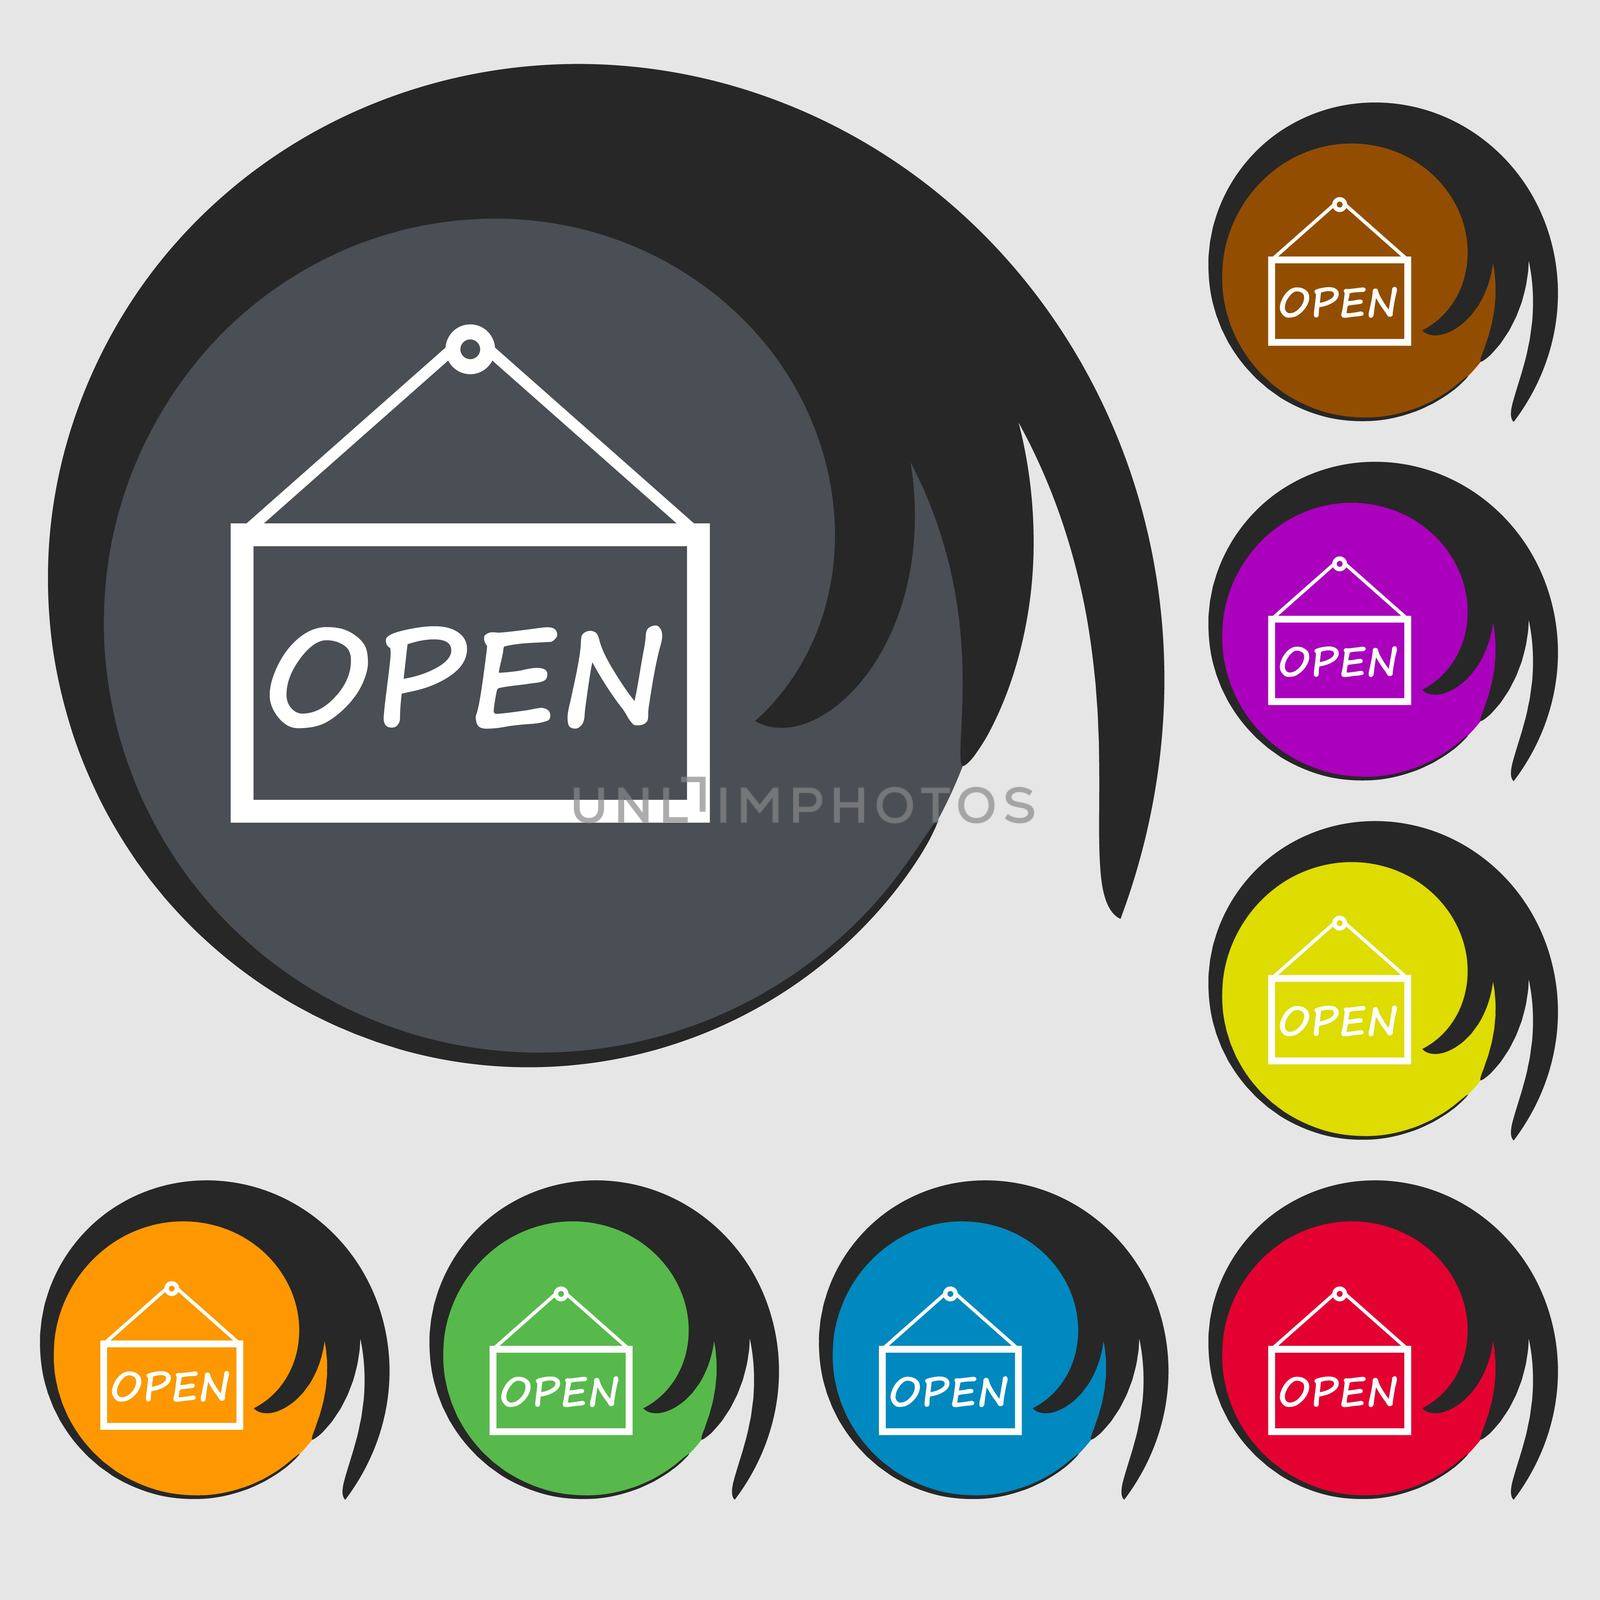 open icon sign. Symbols on eight colored buttons. illustration